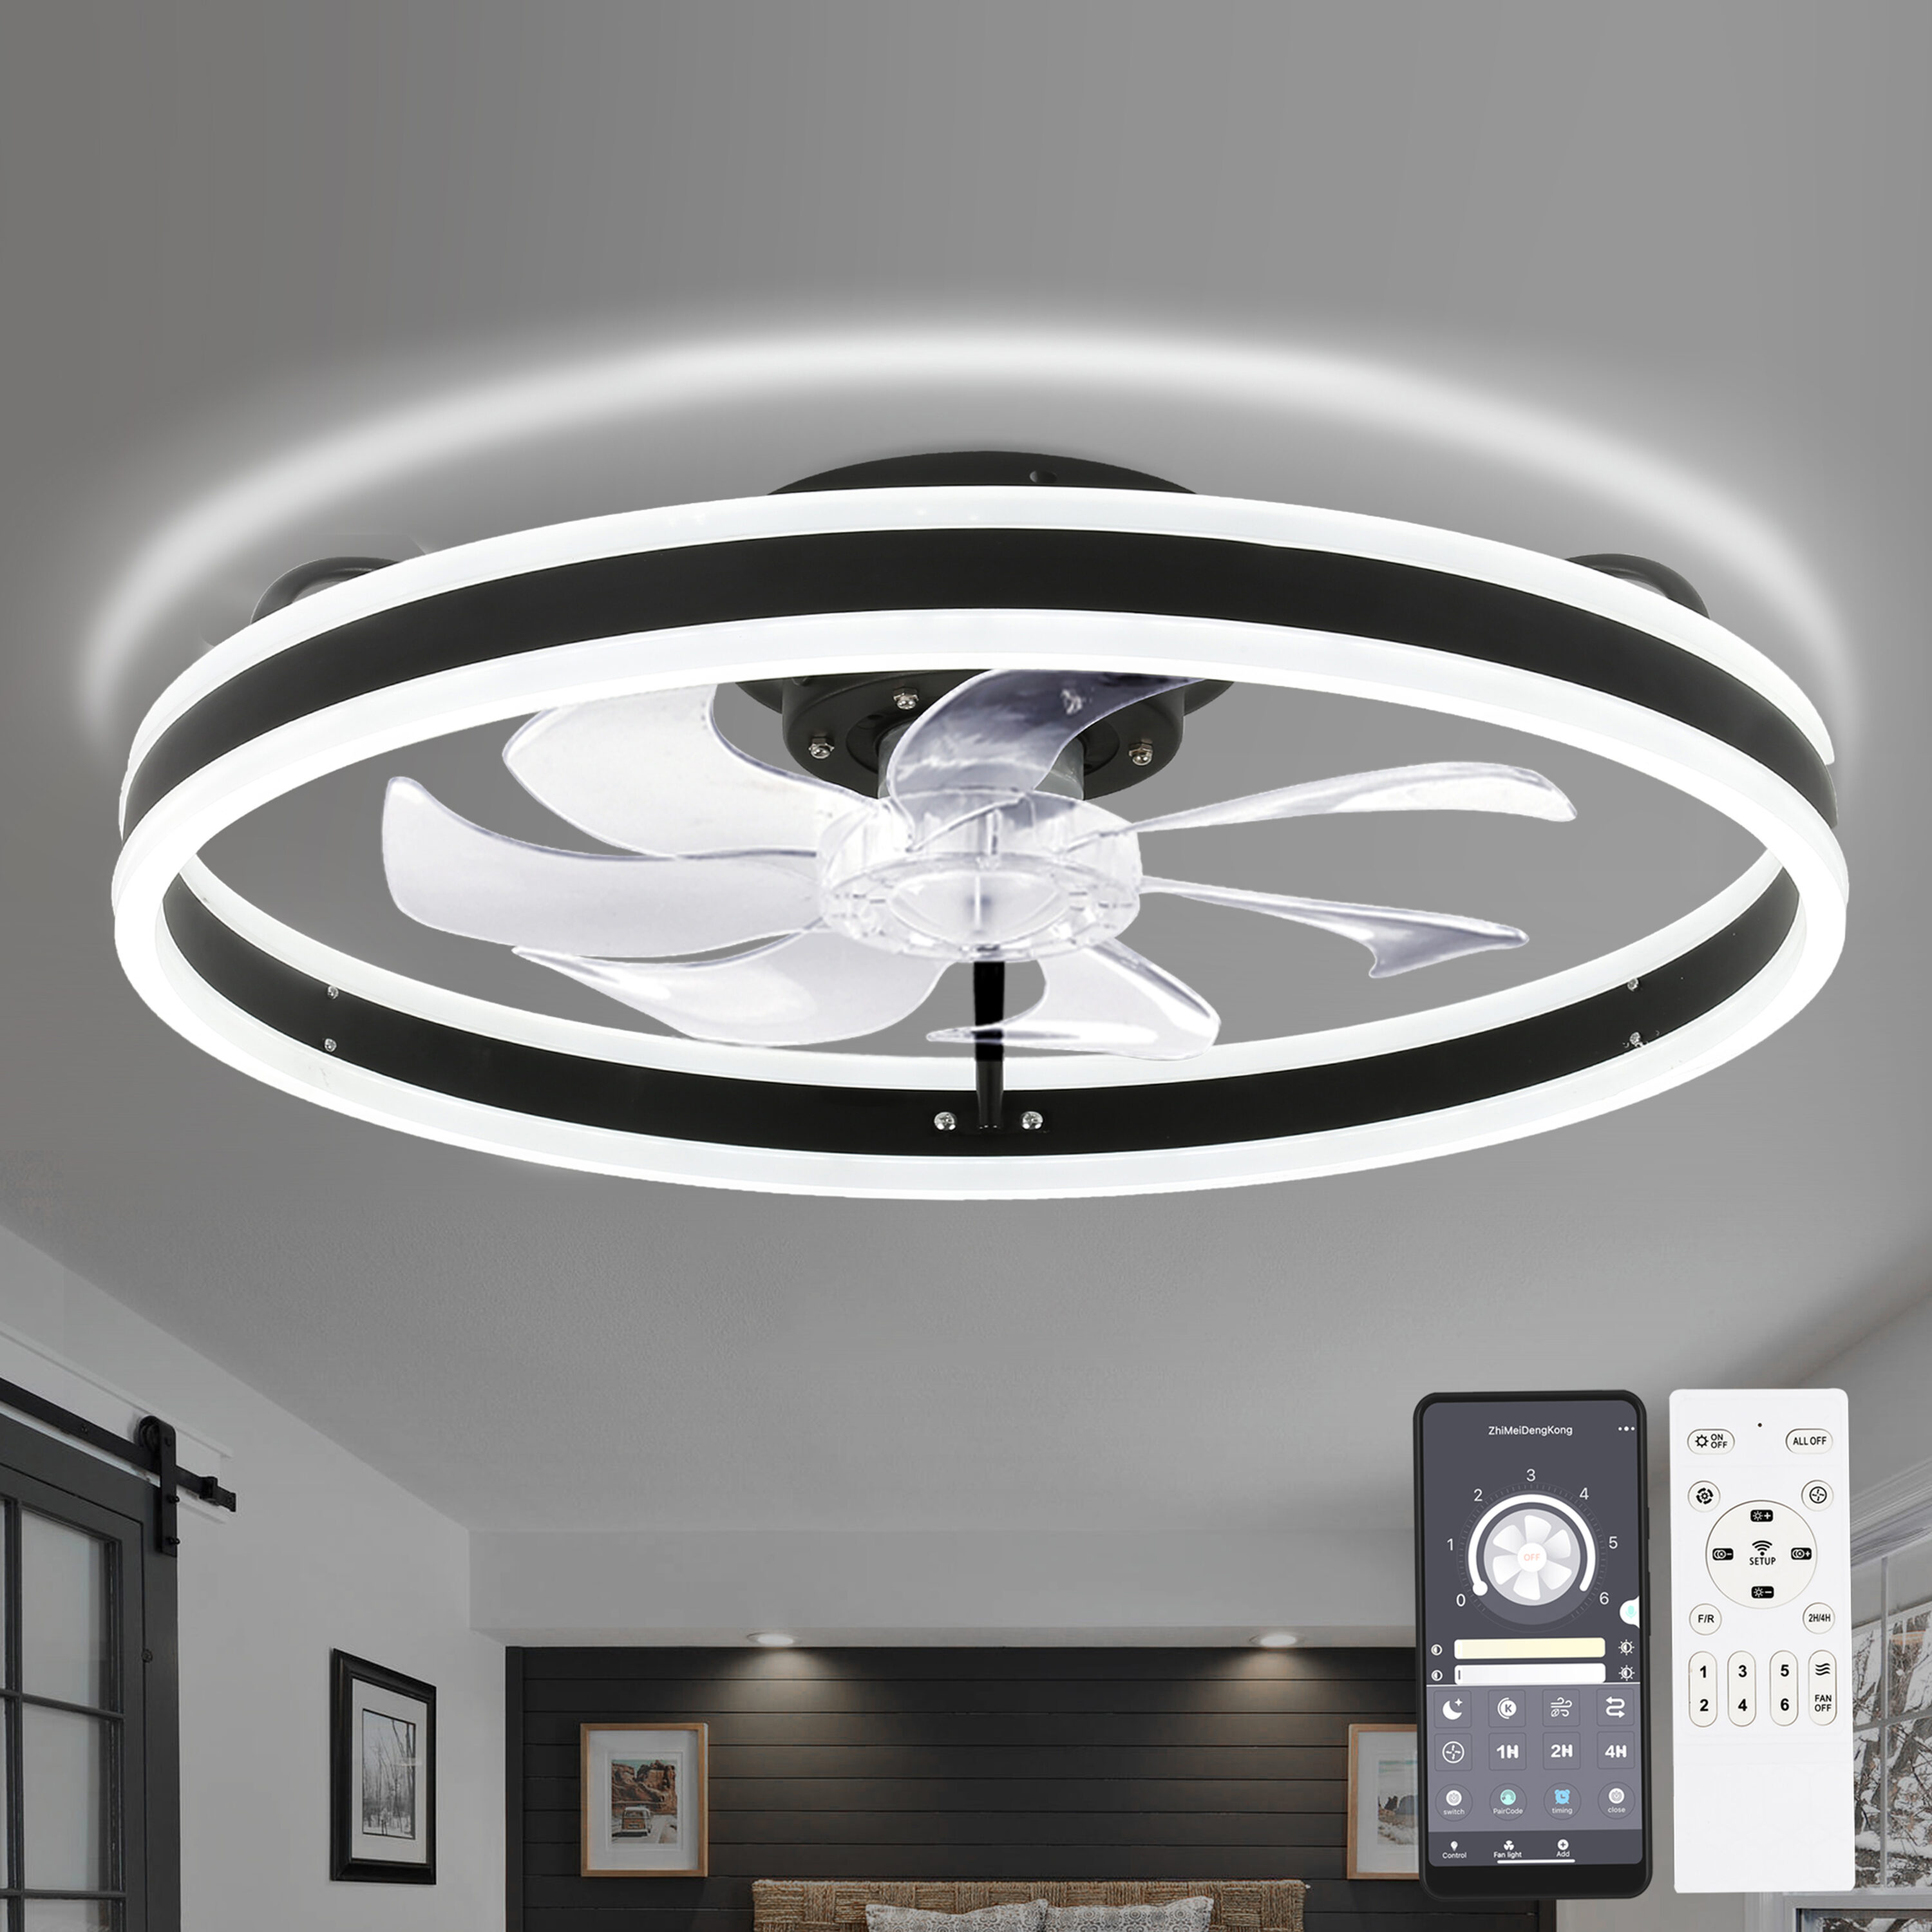 Govee Lighting & Ceiling Fans at